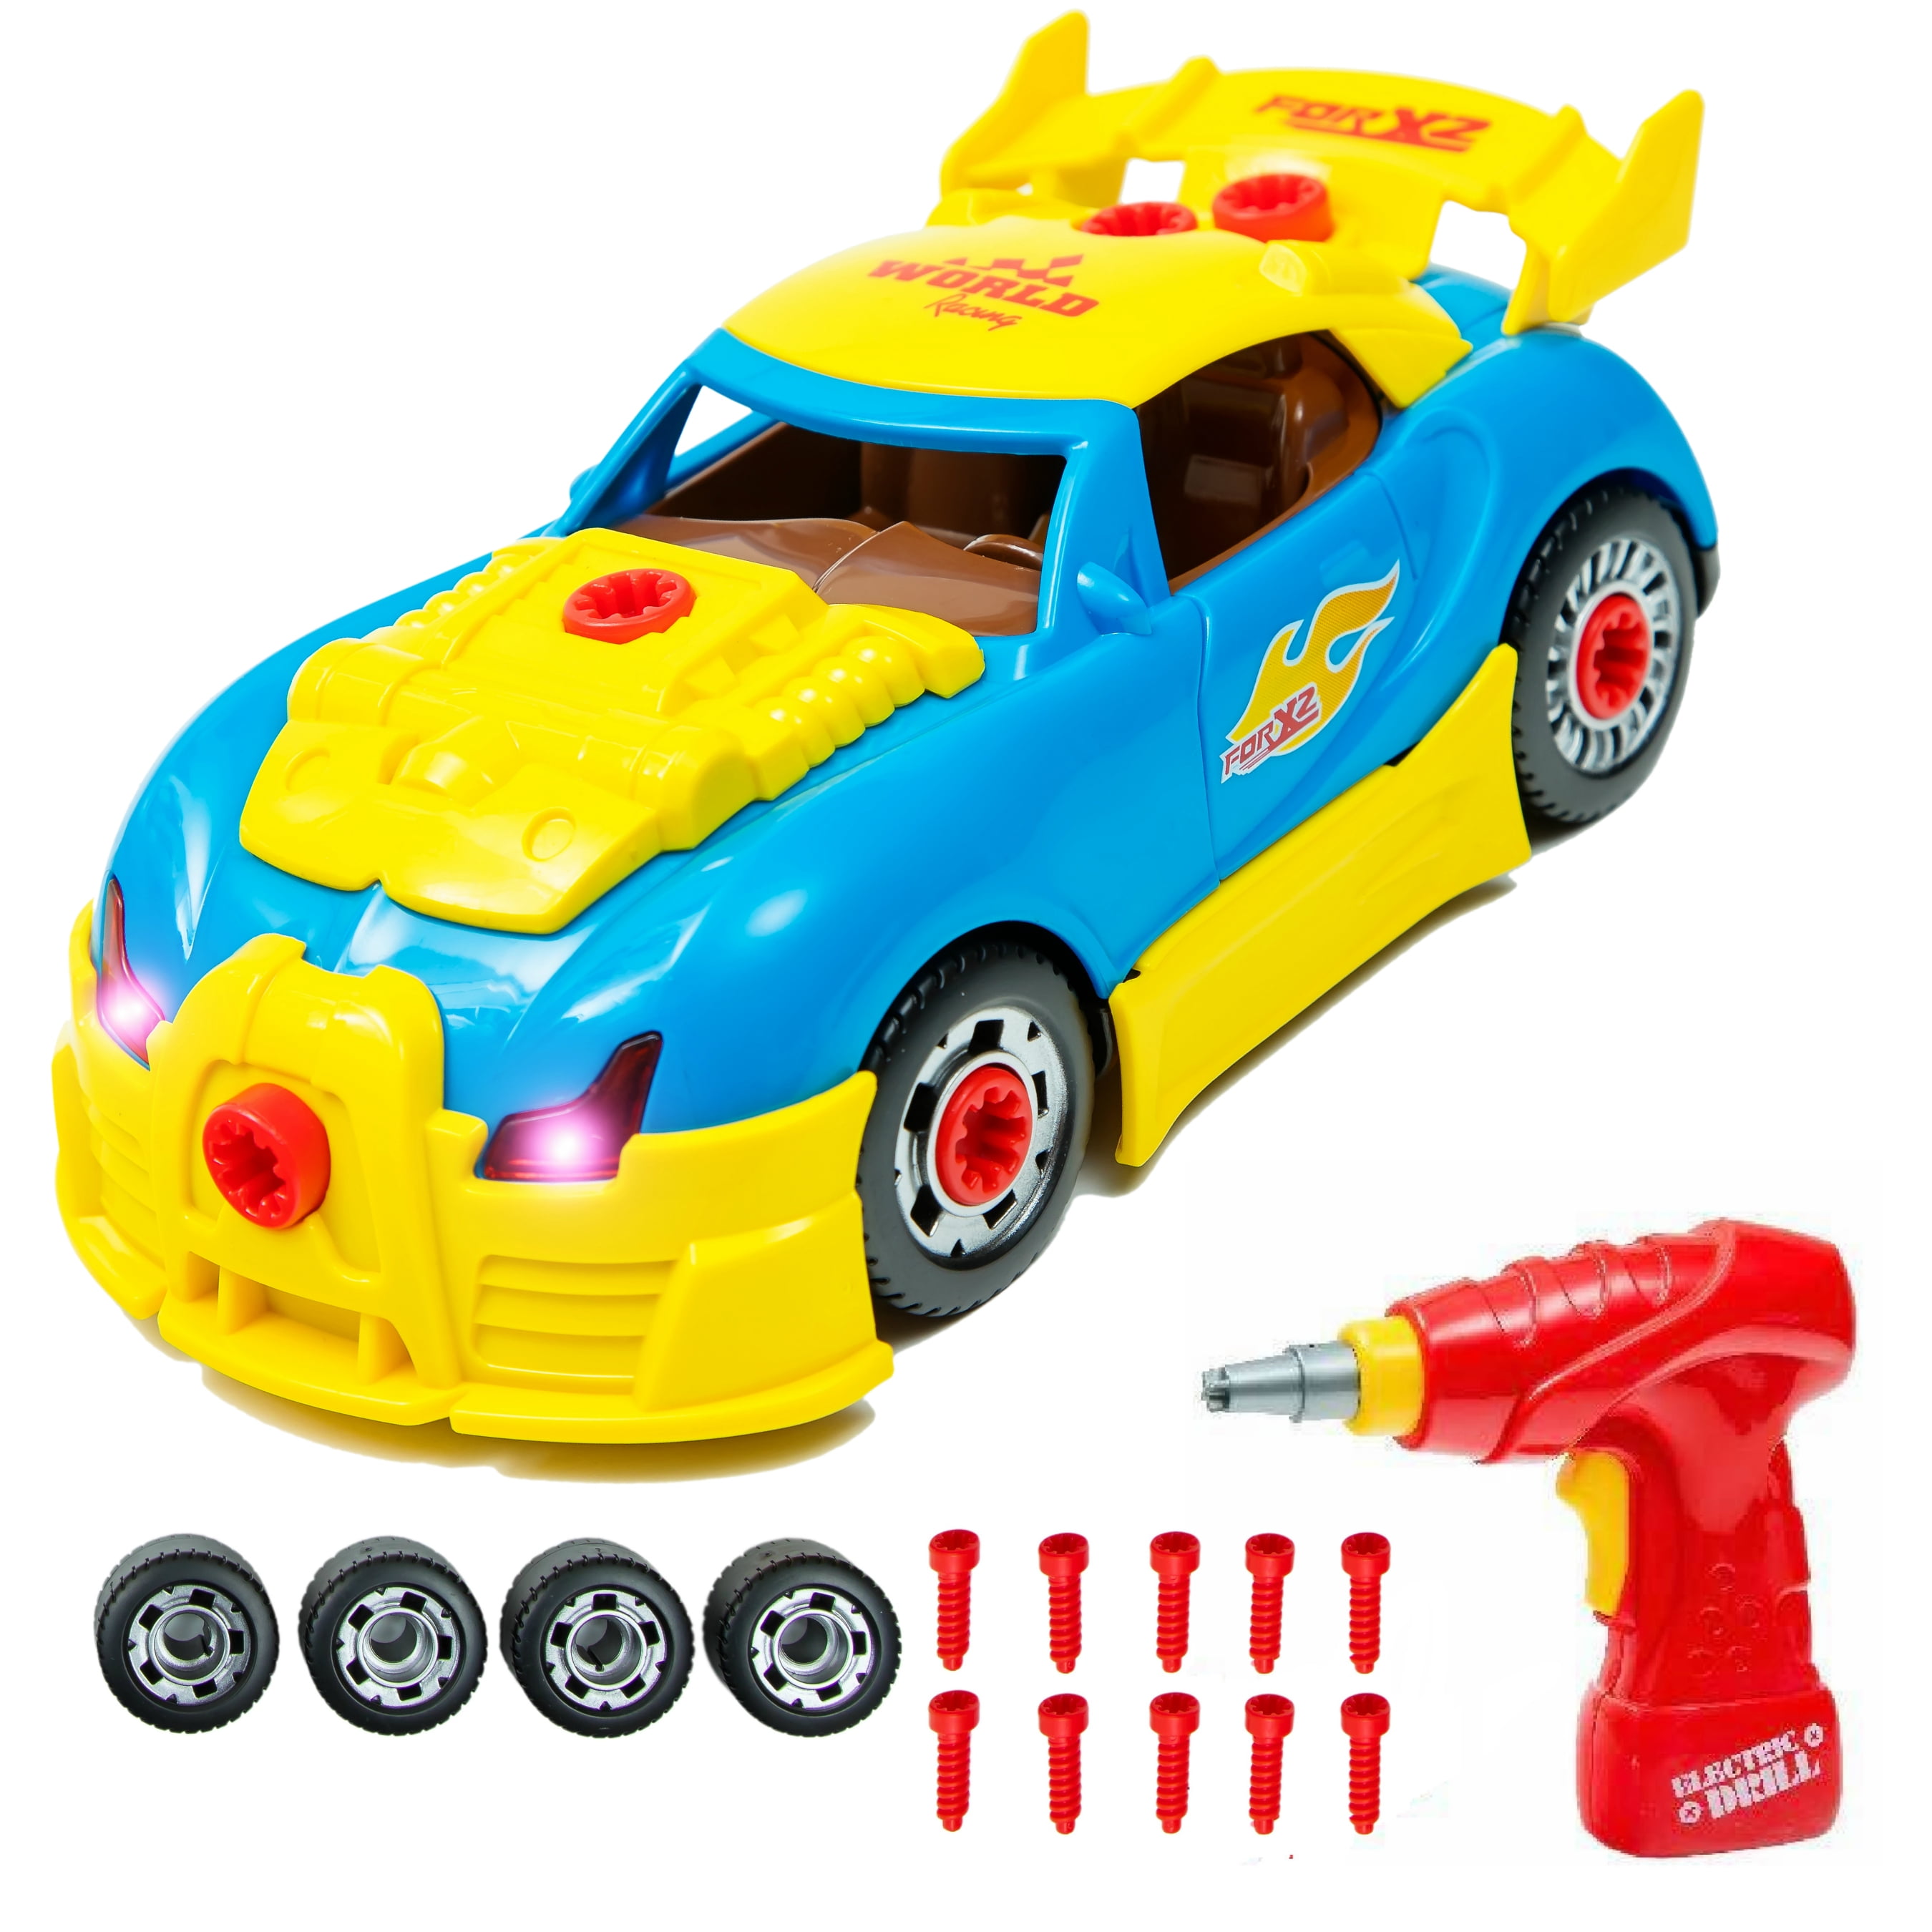 NEW CAR WITH DRILL TOOLS TAKE APART RACING CARS TOY FOR BOYS KIDS AGE 3 4 5 6 7 